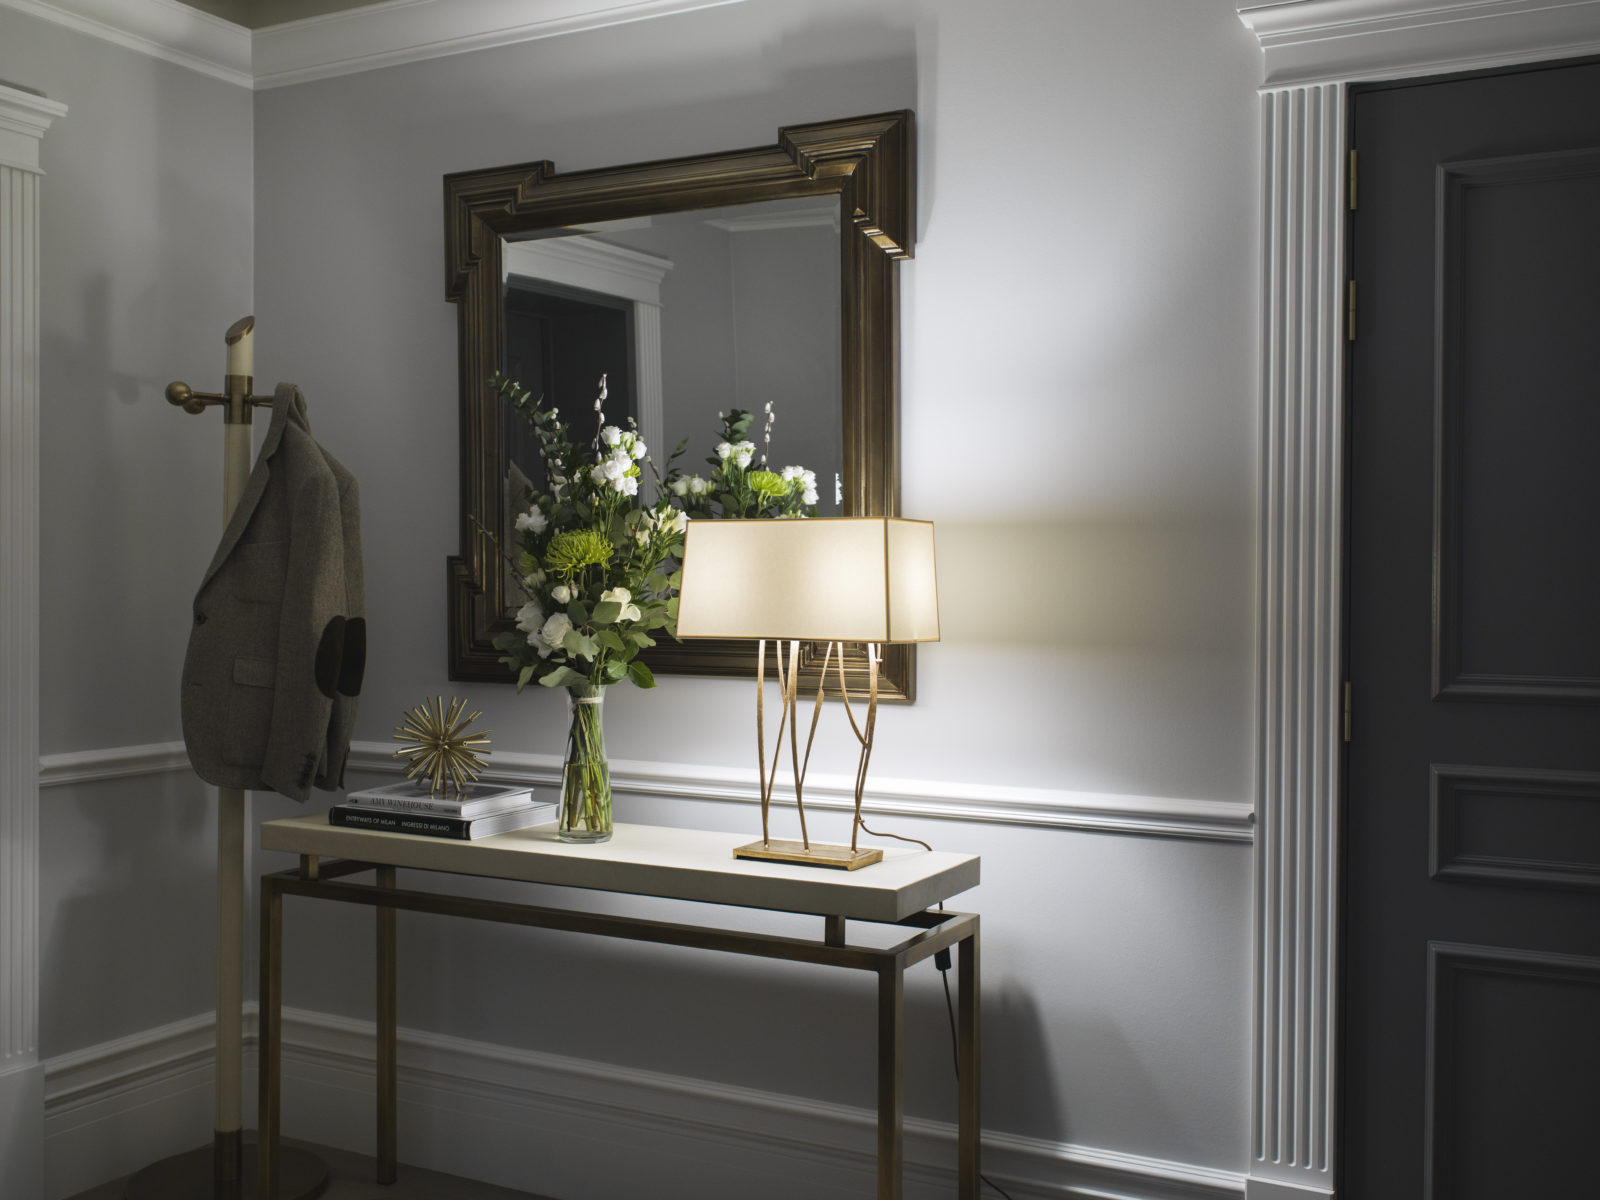 Hallway entrance with a console table, lamp and luxurios interior details